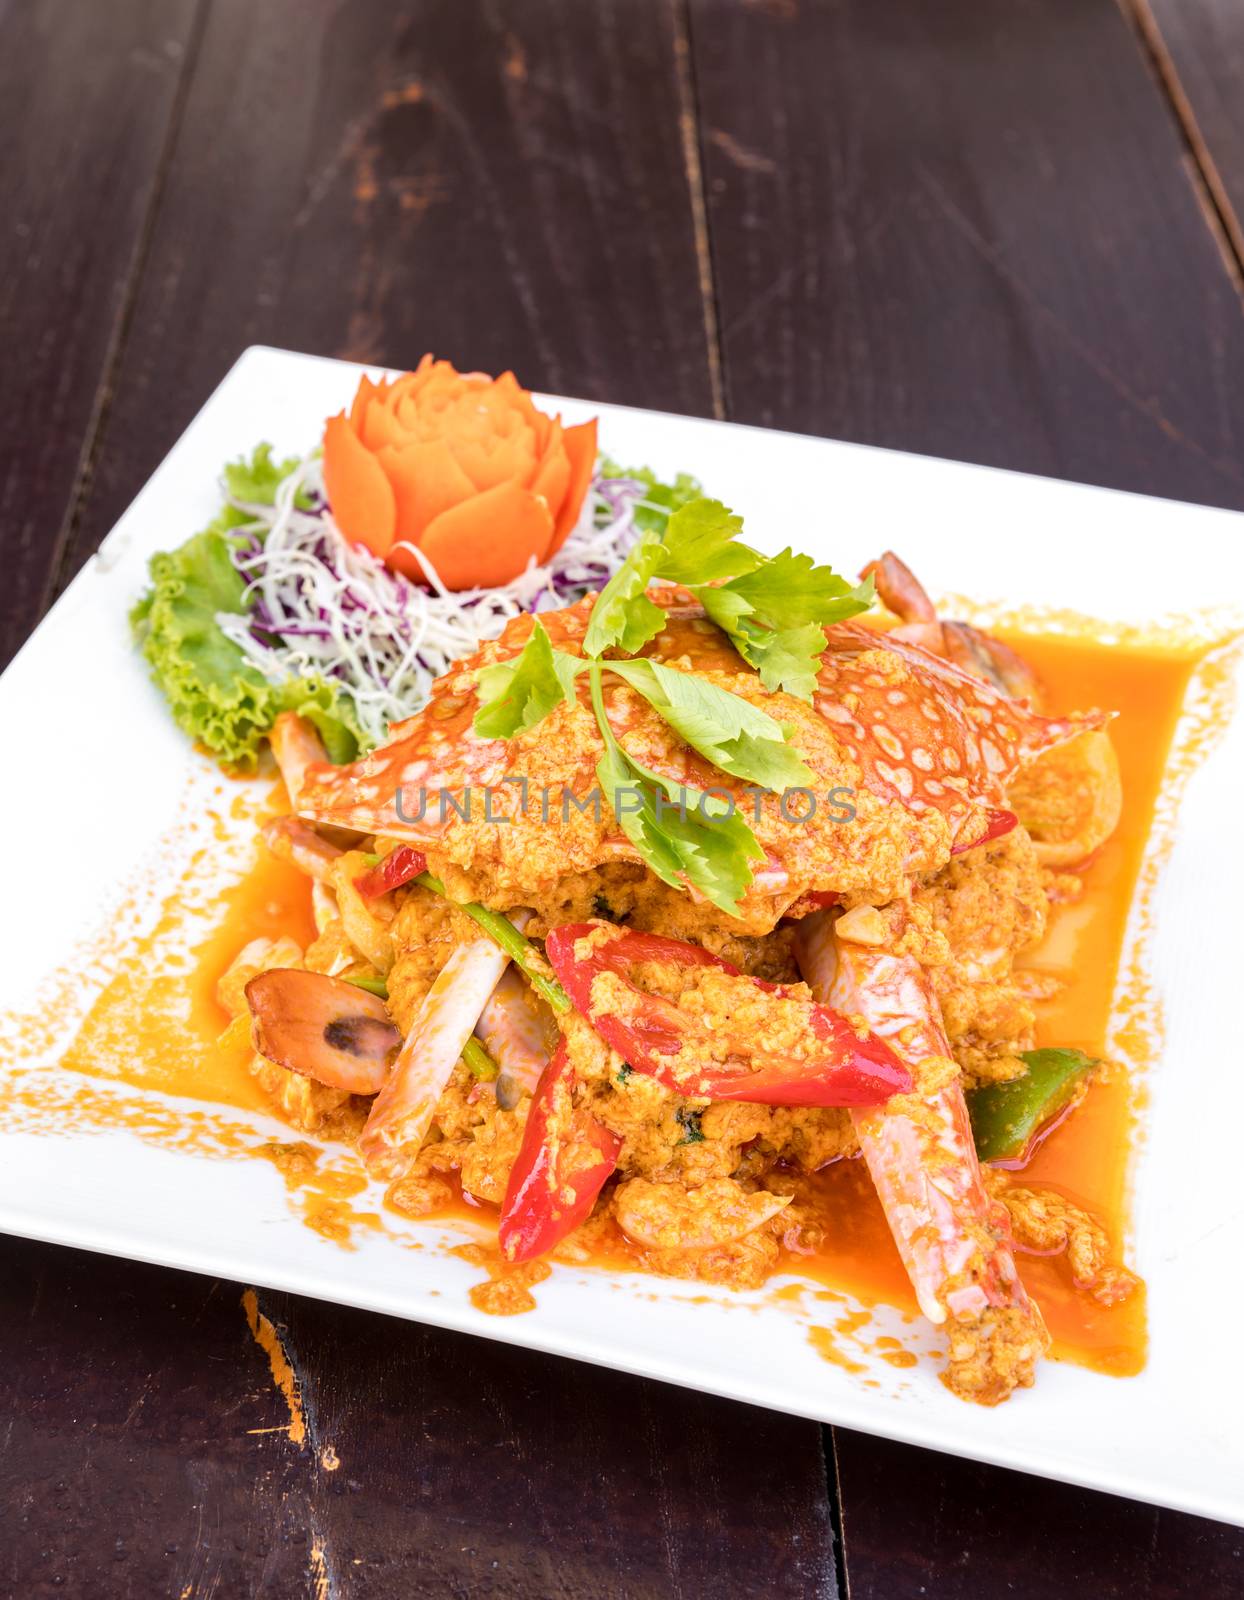 Fried curry crab by vichie81